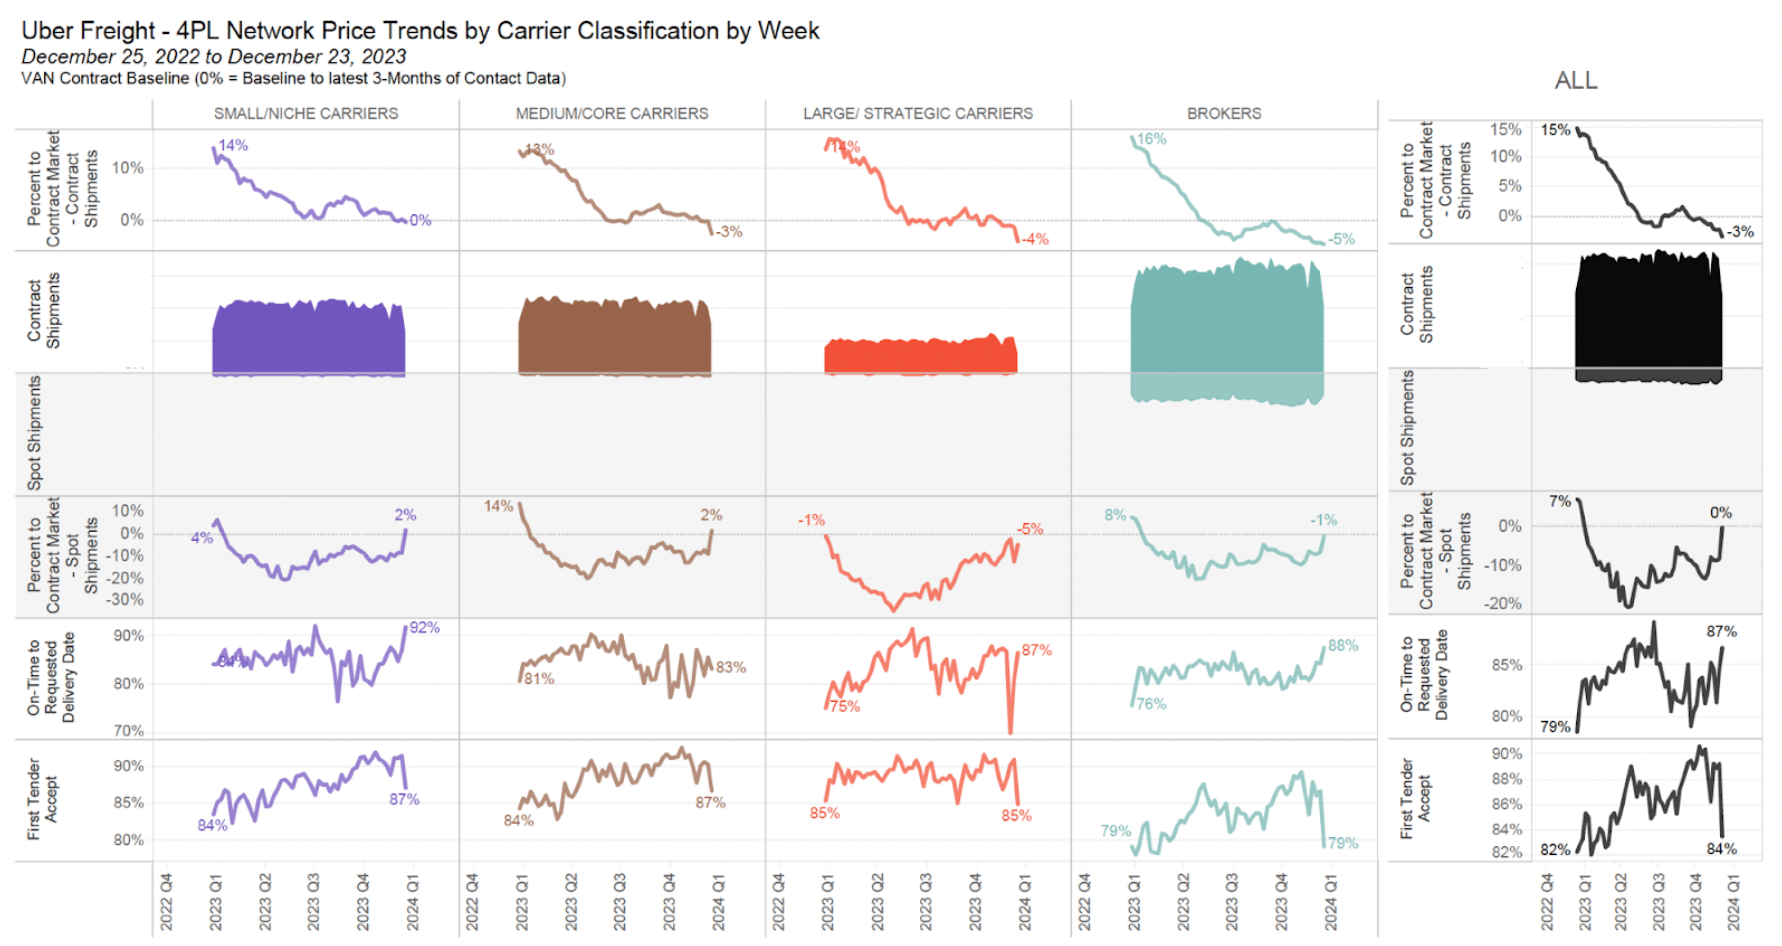 Uber Freight 4PL Network Price Trends by Carrier Classification by Week